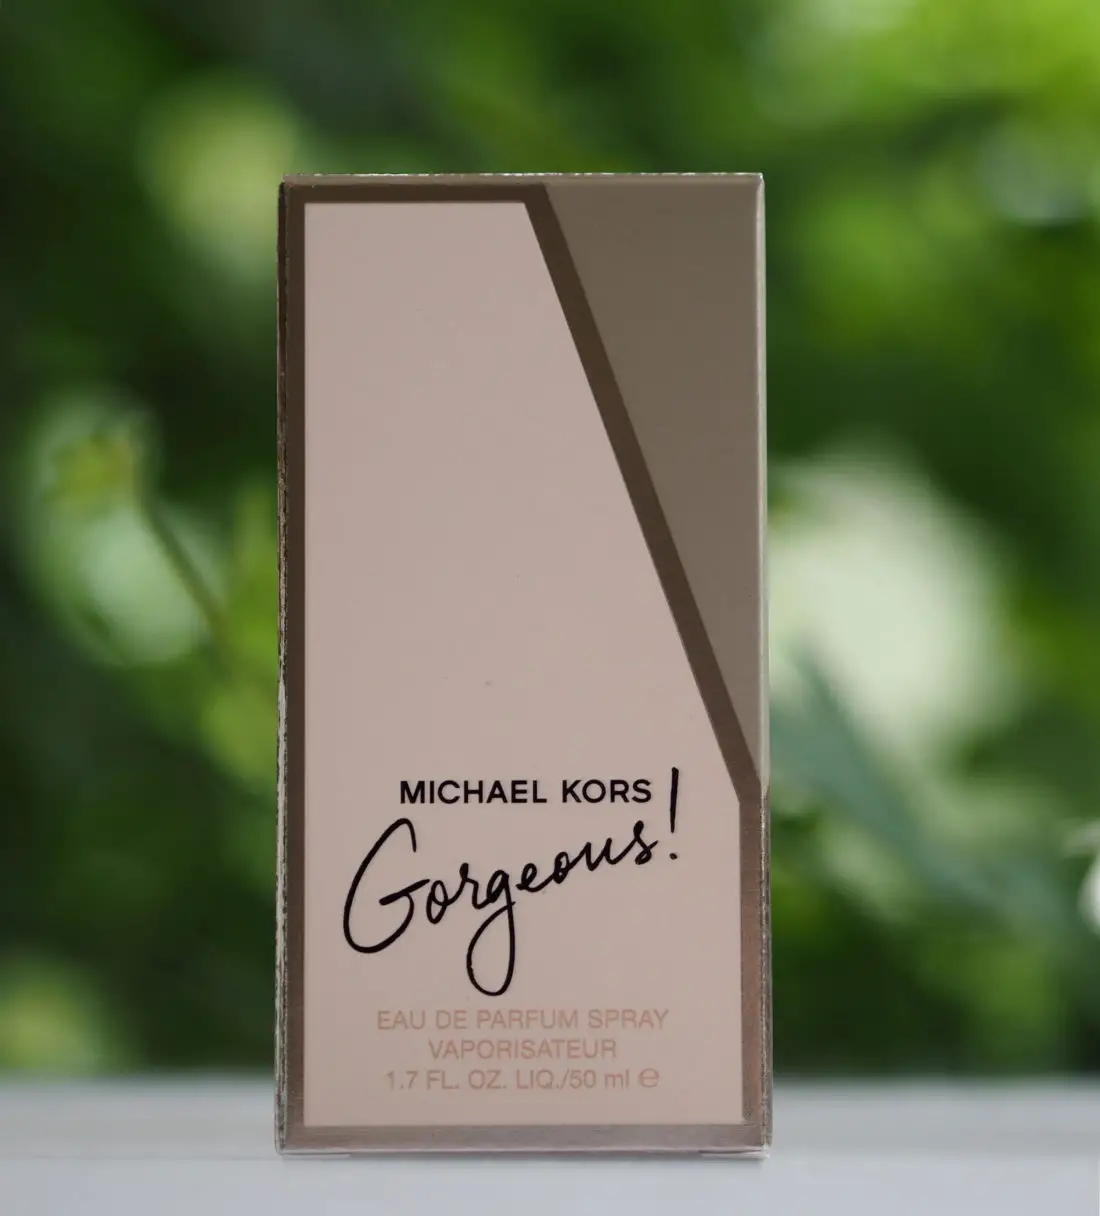 George Lifestyle  Michael Kors Gorgeous Eau de Parfum New Fragrance  Michael Kors Gorgeous Eau de Parfum is a striking floral woody aroma that  knows exactly how to make an appearance Recreating